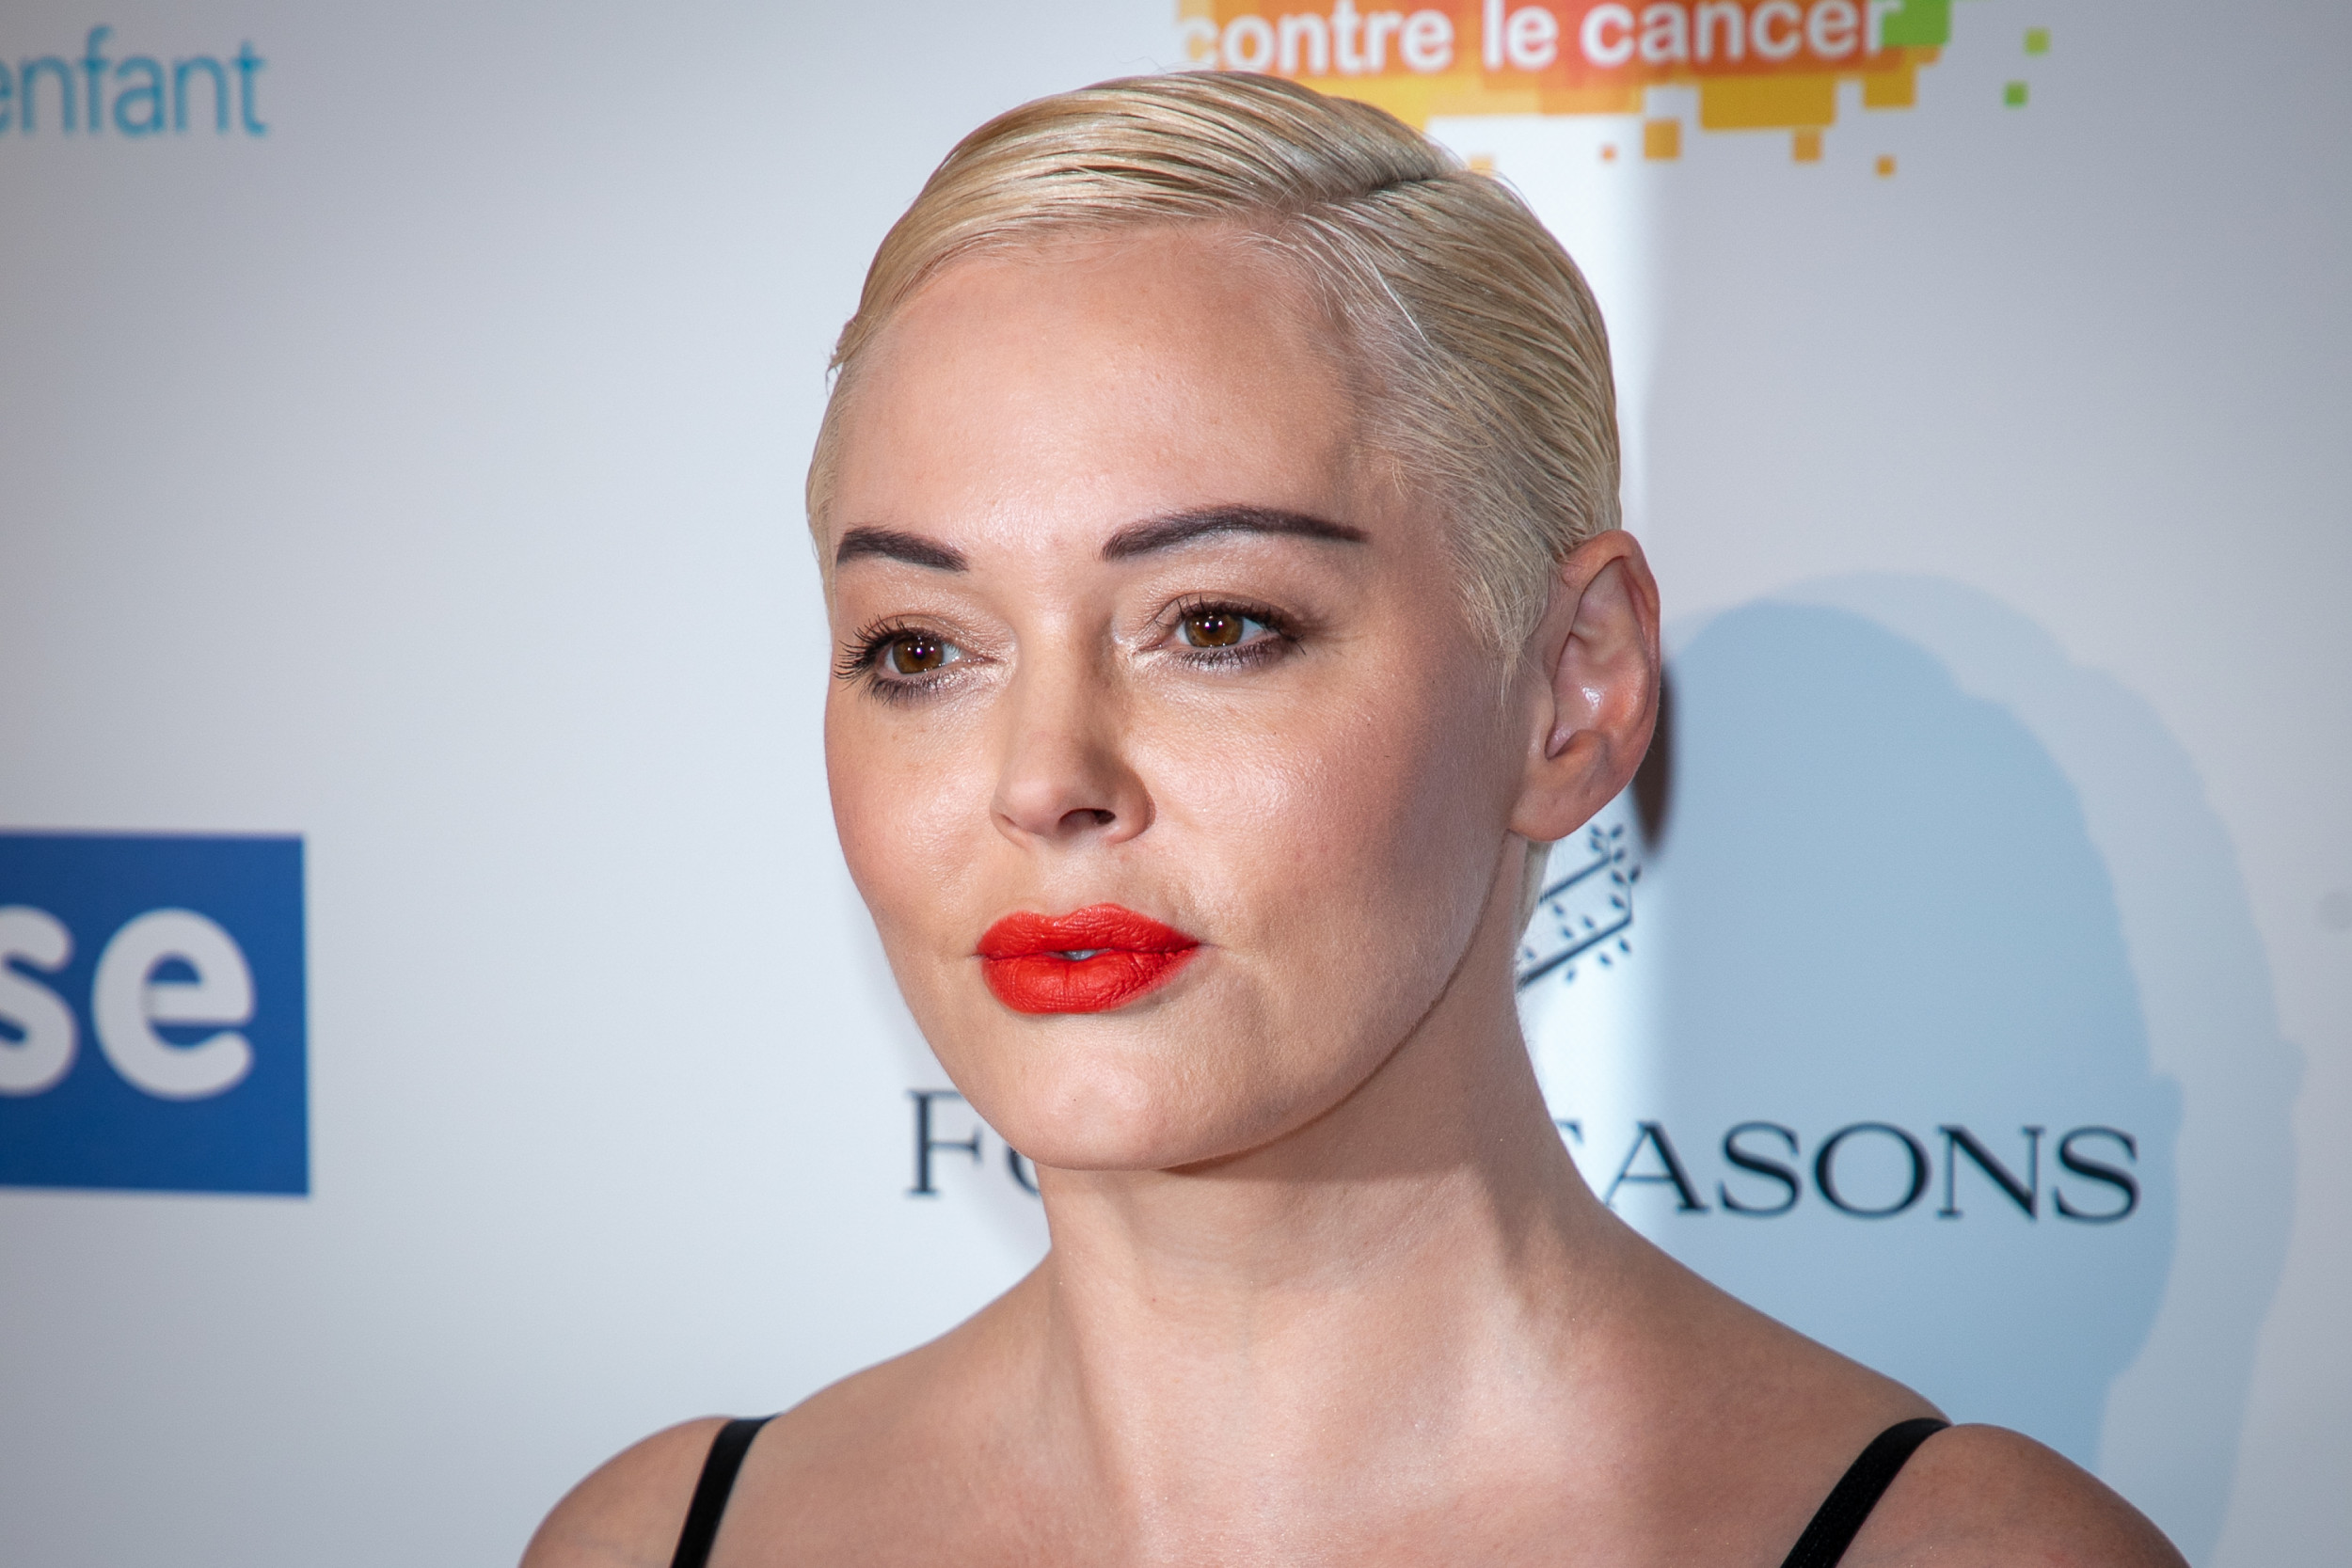 Rose Mcgowan - Rose McGowan Accuses Alexander Payne of Sexual Misconduct: 'I Was 15'